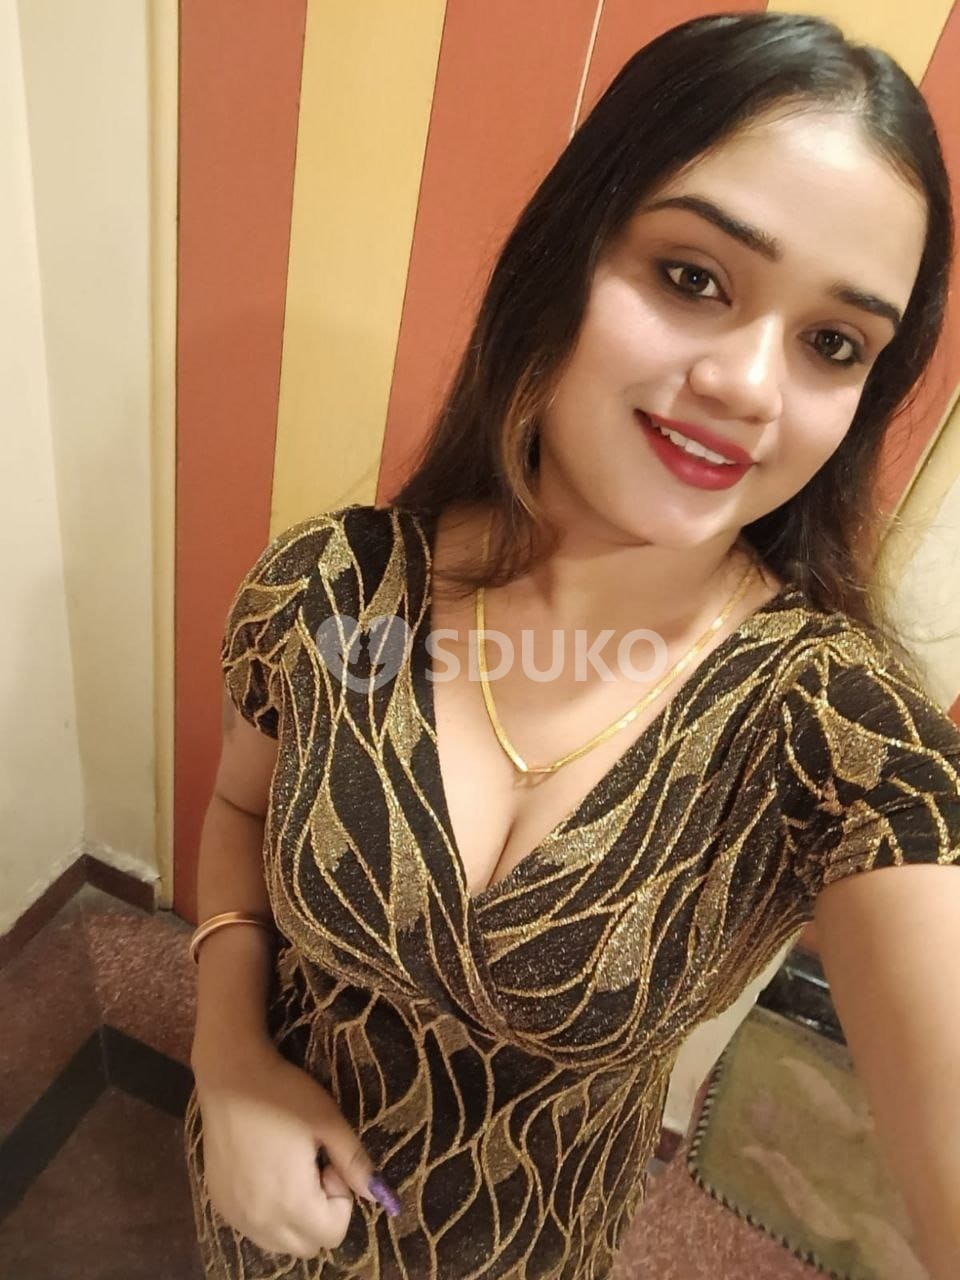 Ooty independent call girl 24 hr fully safe and secure service call me